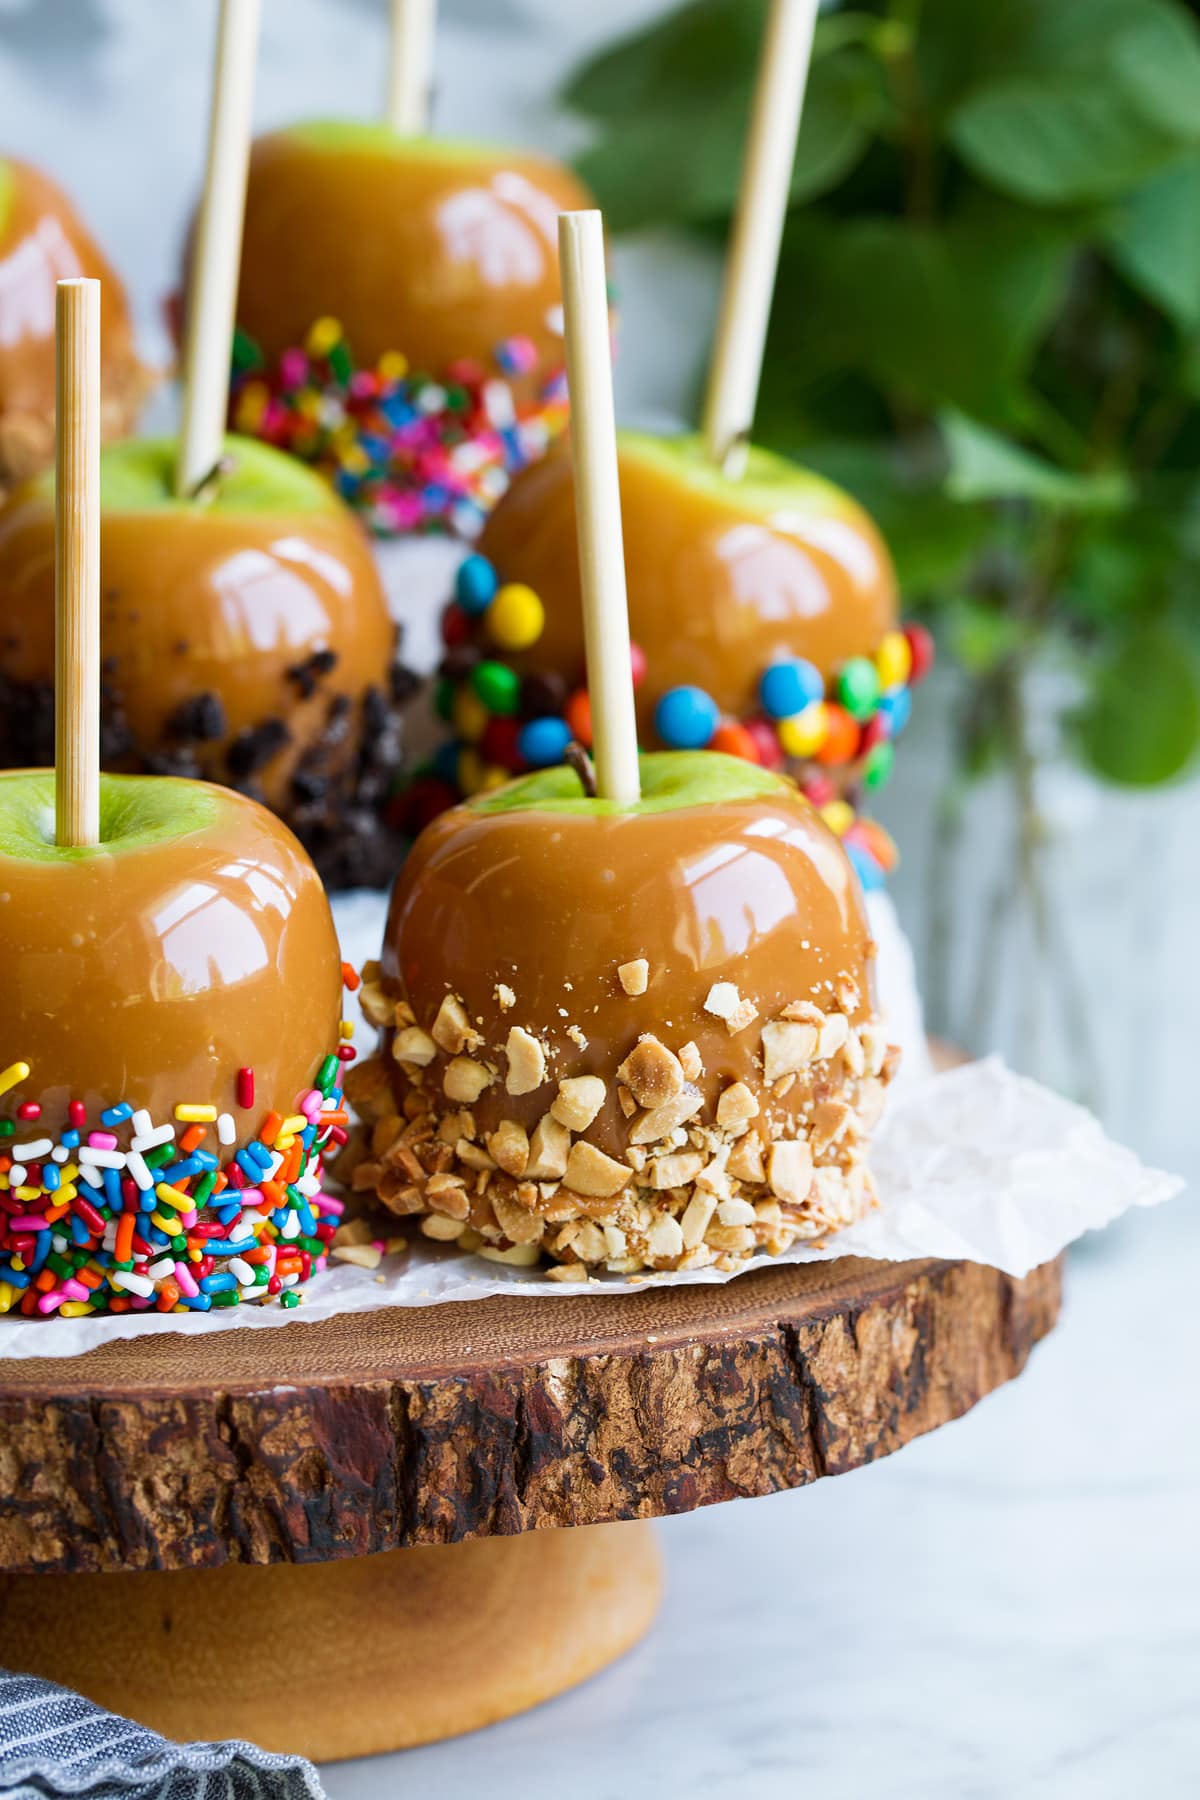 Close up image of stand full of caramel apples.